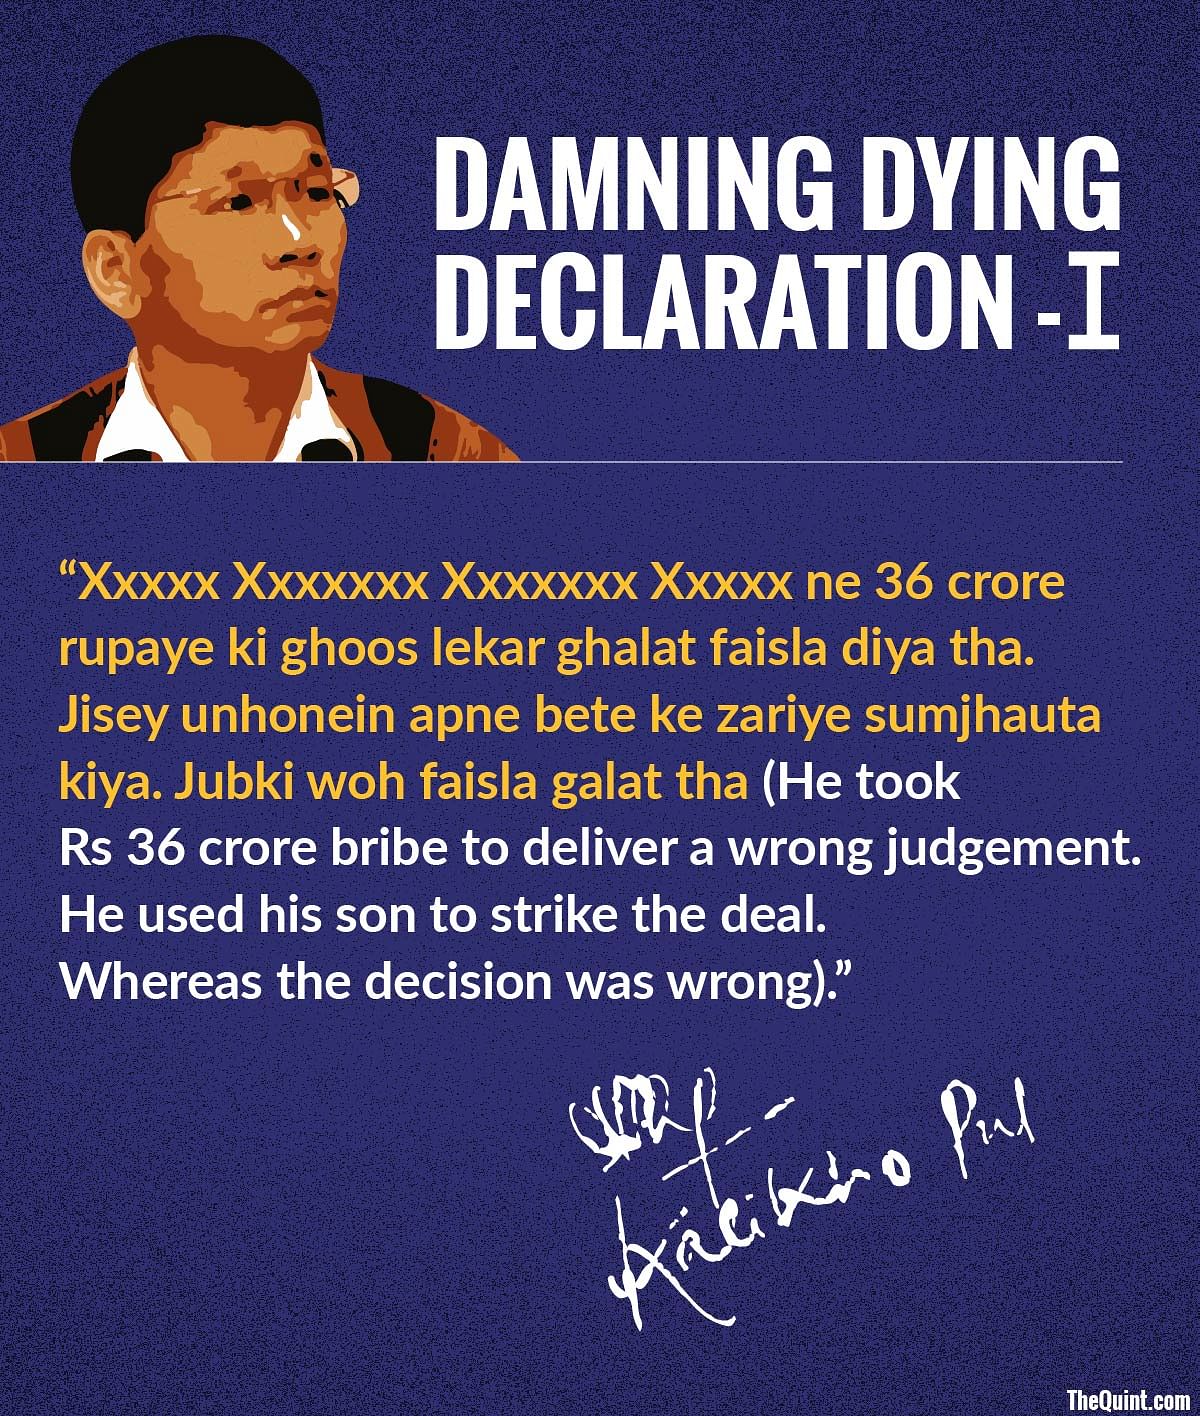 

The suicide note contains names of four top officials in India’s legal fraternity, who demanded bribes from Pul.